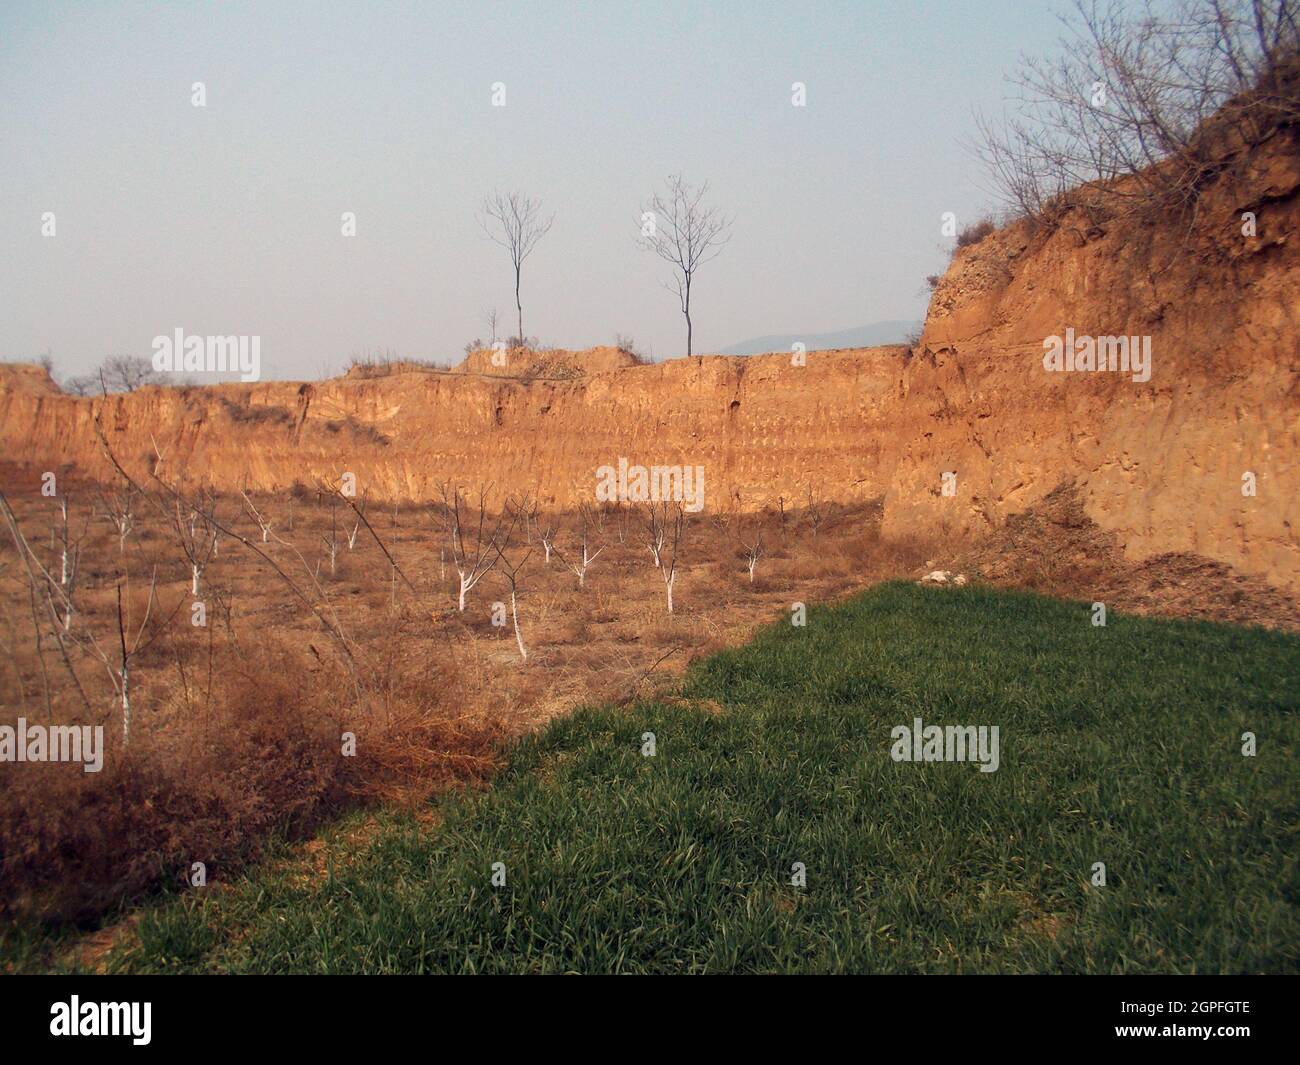 (210929) -- XI'AN, Sept. 29, 2021 (Xinhua) -- Photo shows a water pond ruin at the Zhouyuan site in Baoji City, northwest China's Shaanxi Province. Archaeologists in Shaanxi said they have discovered large ponds and ditches at an archaeological site in the province. Located in Baoji City, the Zhouyuan site is believed to be the largest city ruins of the Western Zhou Dynasty (1046-771 B.C.). (Shaanxi Academy of Archeology/Handout via Xinhua) Stock Photo